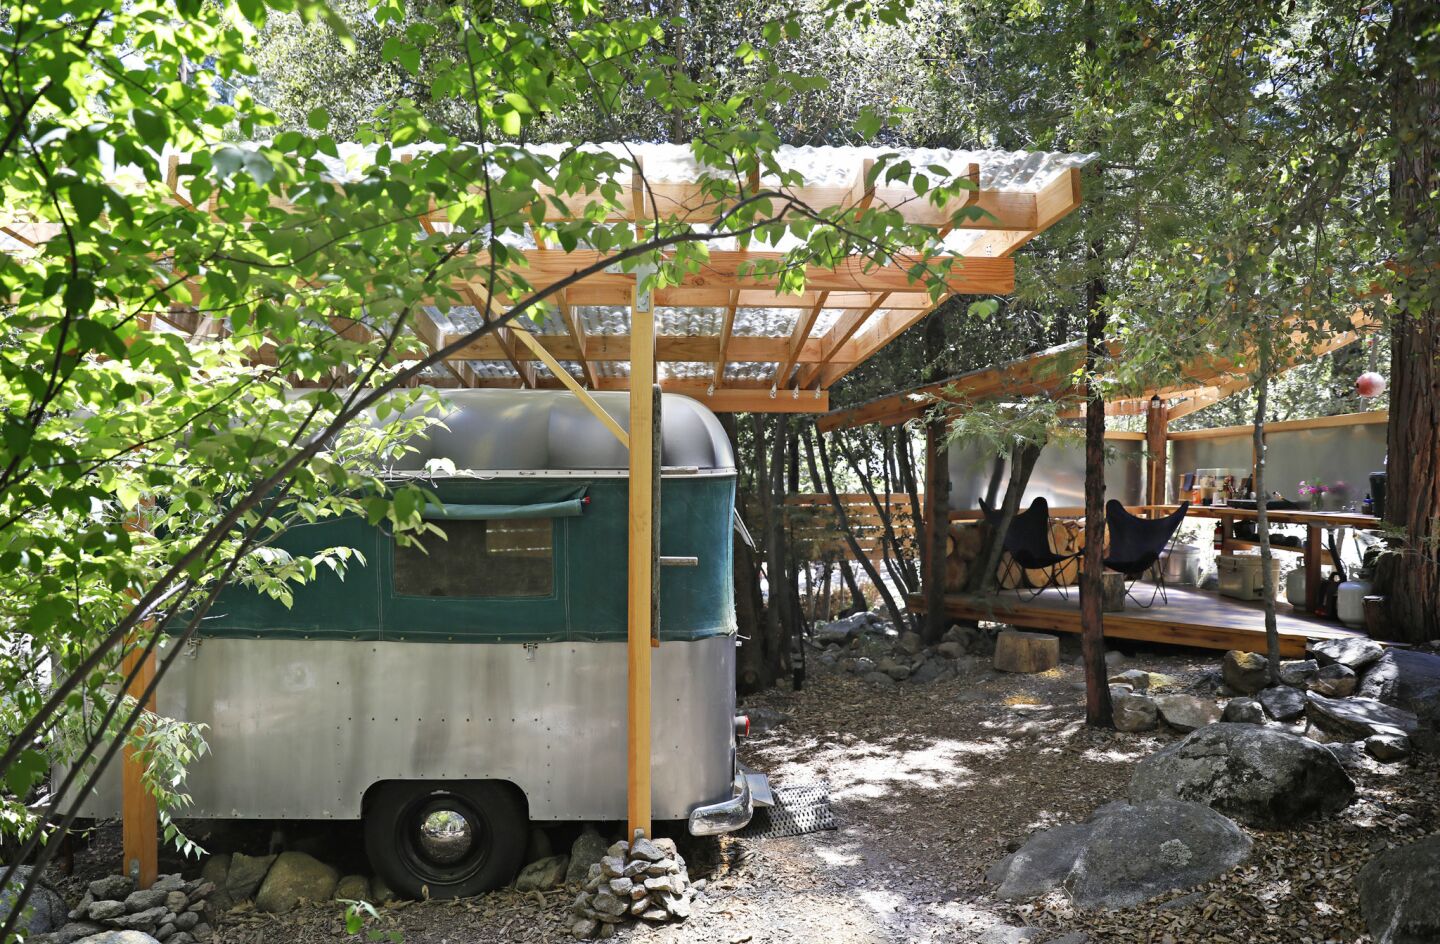 A 1955 Trail Chief trailer can be rented through Airbnb.